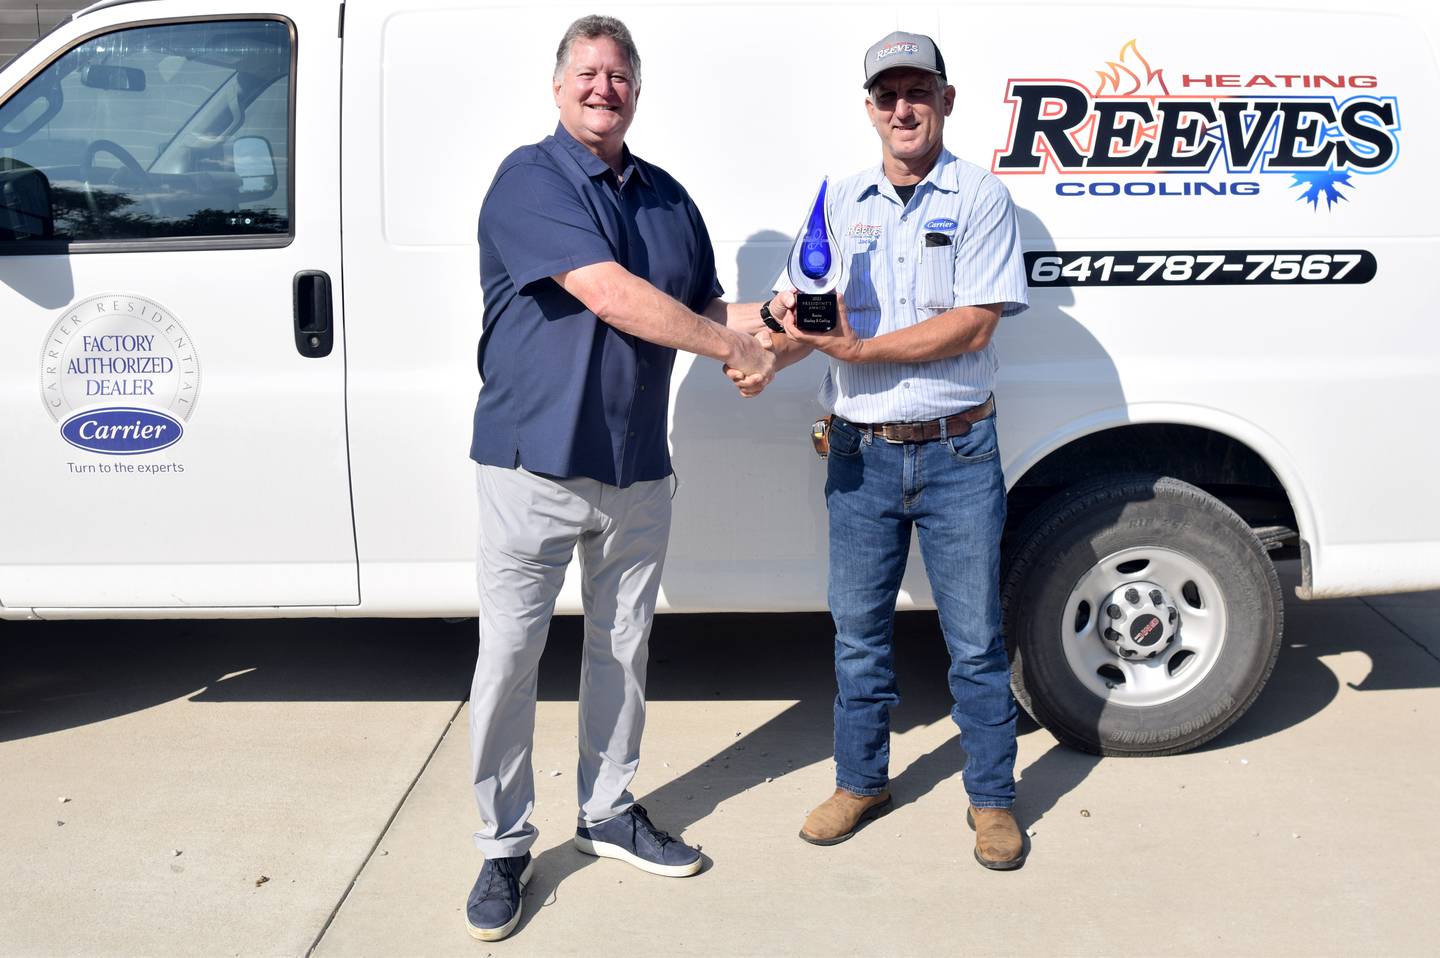 From left: John Lepic, territory manager of Carrier Enterprise Central Plains, shakes hands with Jack Reeves, owner of Reeves Heating & Cooling, who received the Carrier President's Award this year.